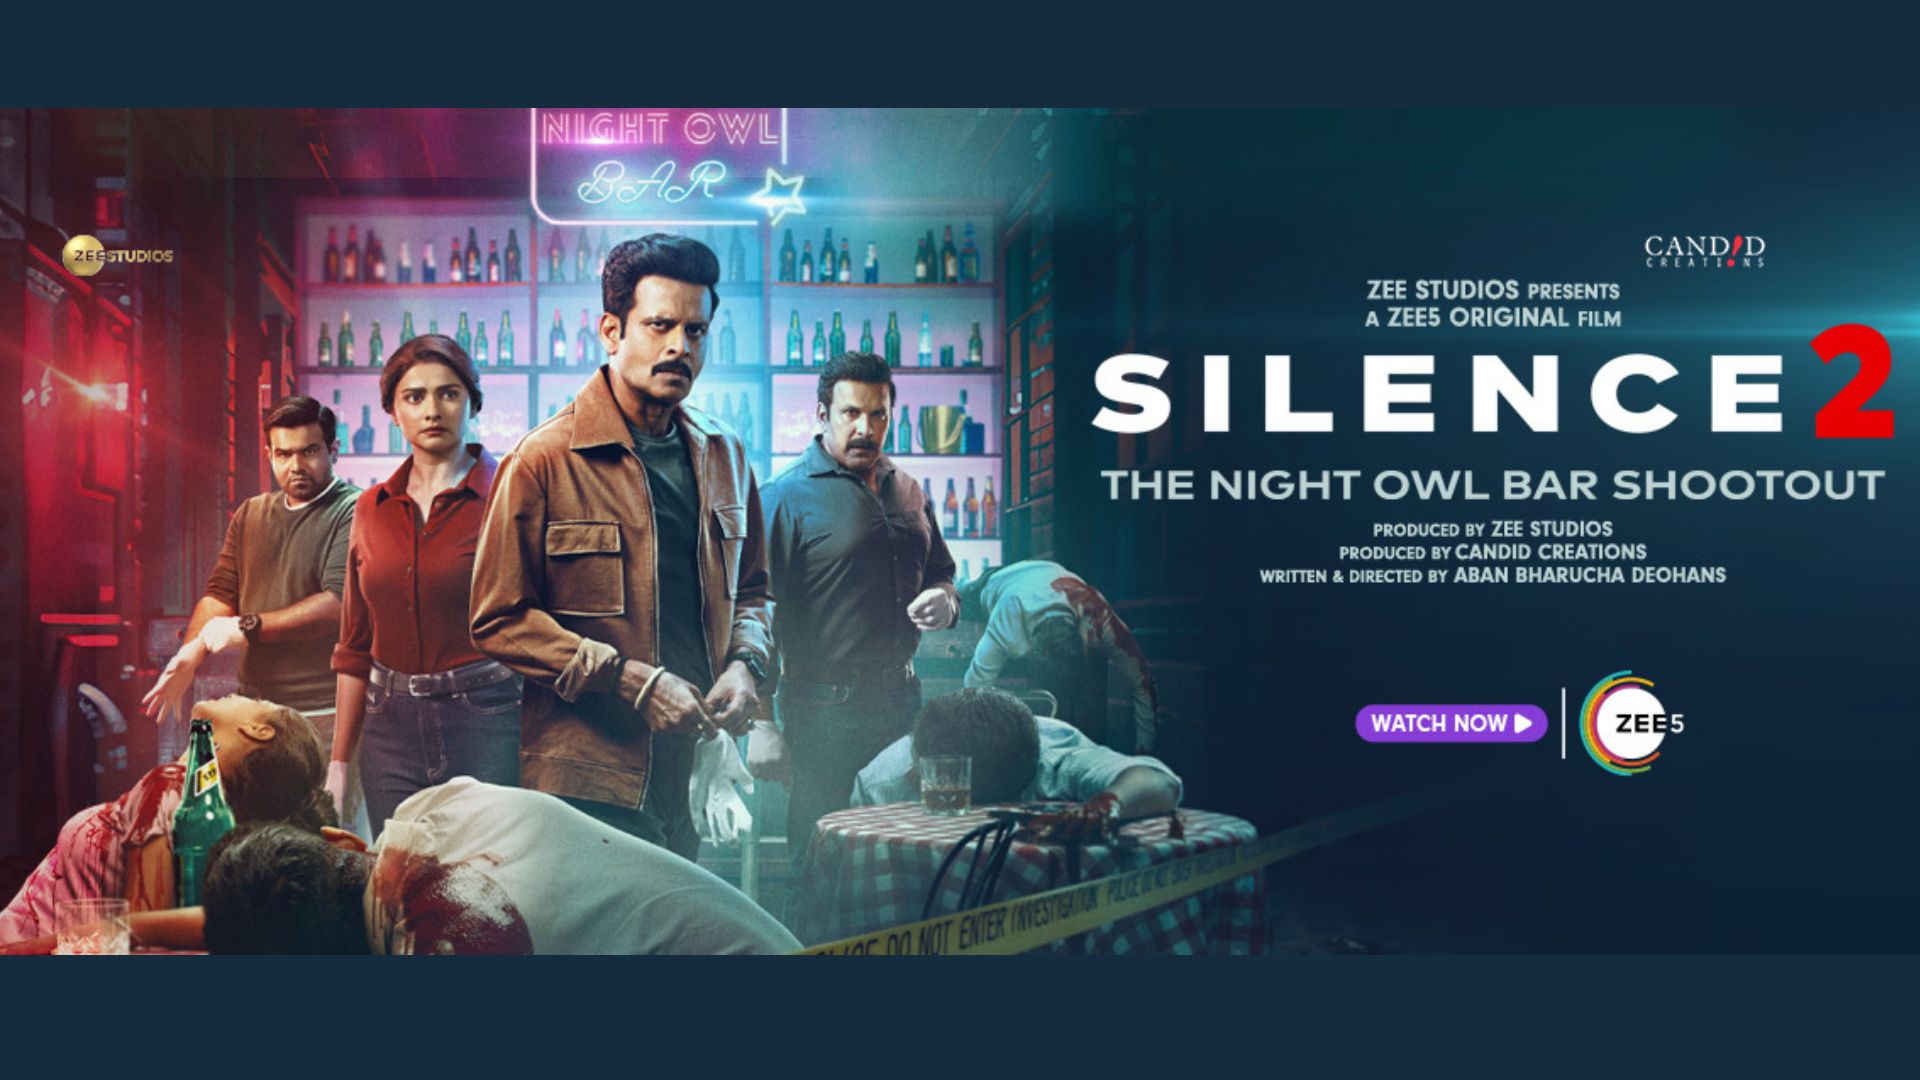 Silence 2: The Night Owl Bar Shootout review: Silence 2 Movie now streaming on ZEE5 OTT Platform.